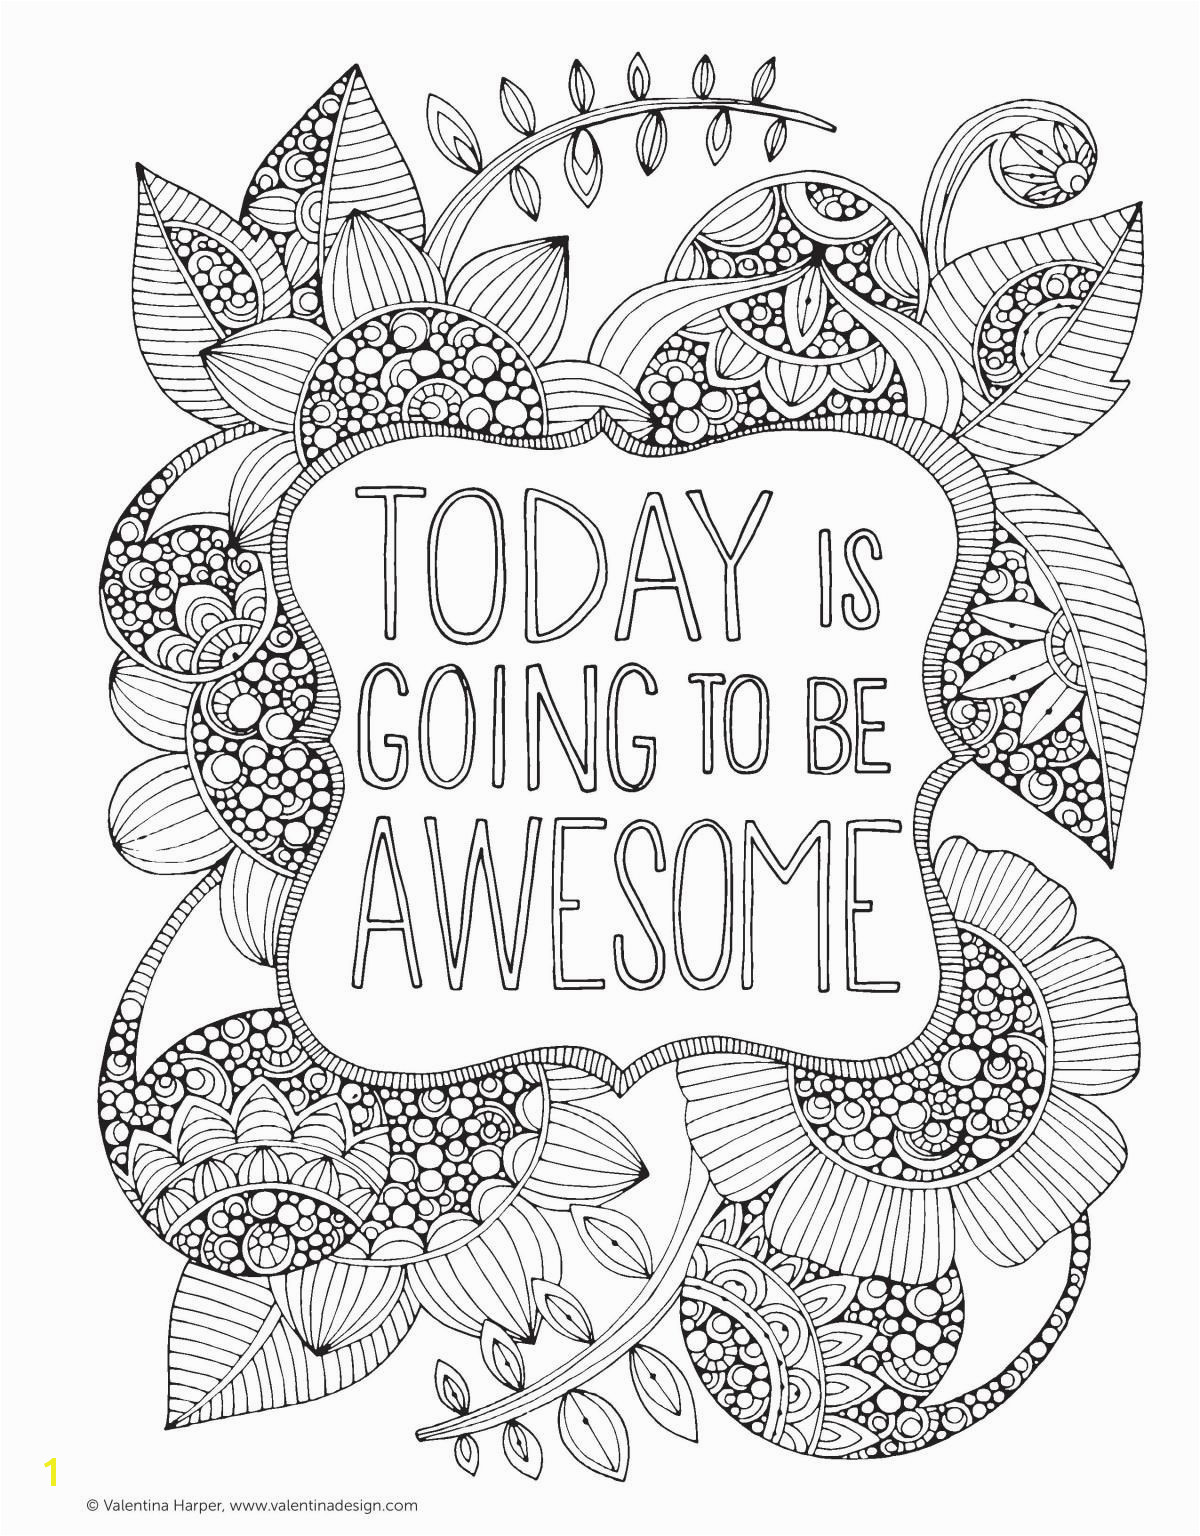 Today is going to be awesome Creative Coloring Inspirations Printable colouring page